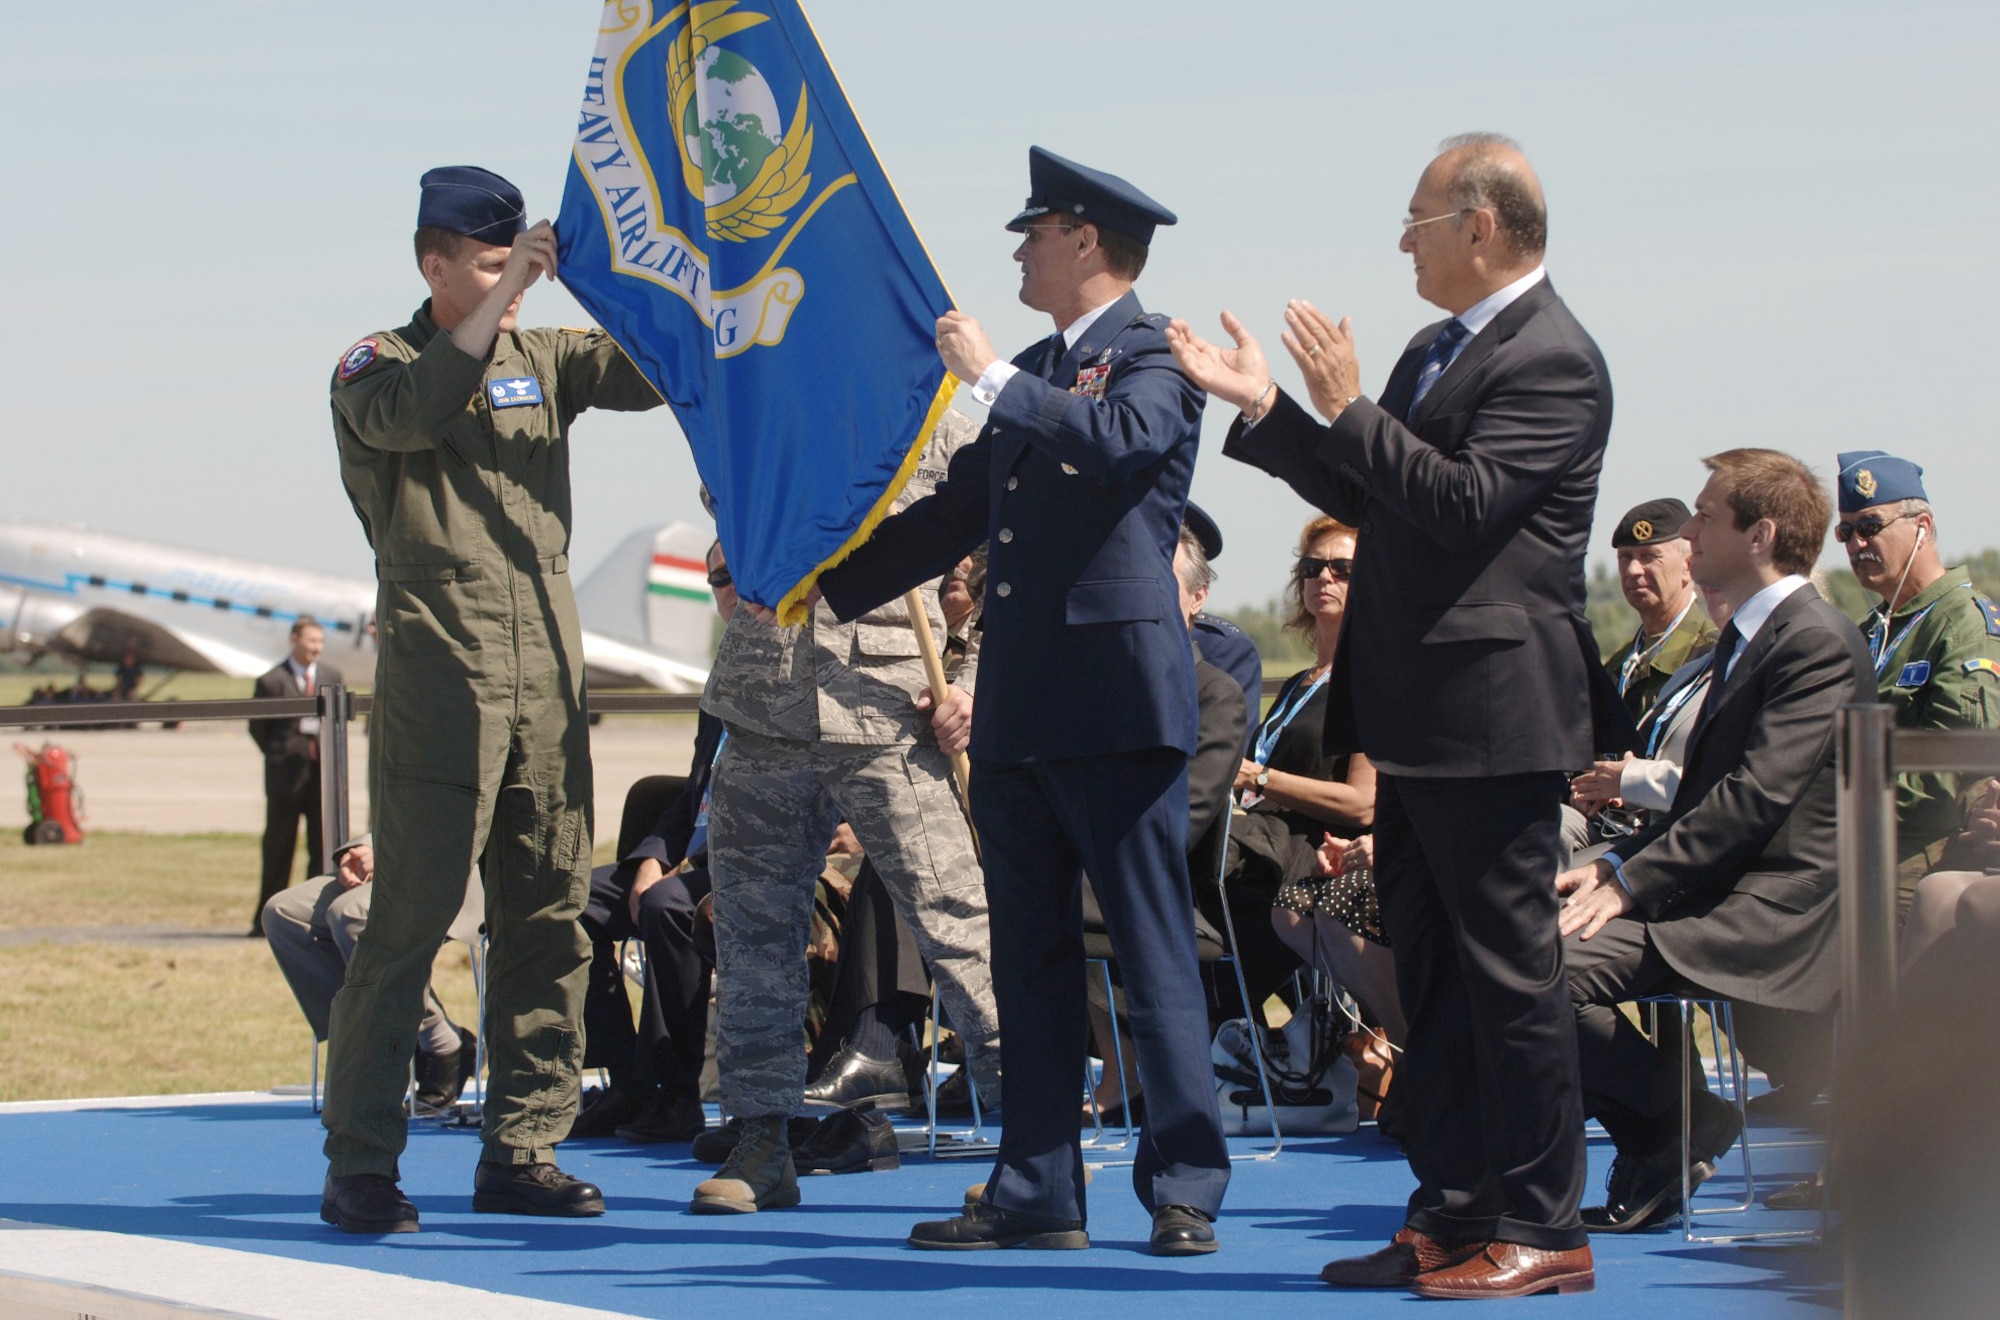 During the official activation ceremony of a first-of-its-kind multinational heavy airlift wing at Papa Air Base, Hungary, July 27, 2009 U.S. Air Force Col. John Zazworsky and Brig. Gen. Richard Johnston unveil the organizational flag. The ceremony celebrated the efforts of the 12 nations who, during the last 10 months, stood up the organization that will provide strategic airlift worldwide for humanitarian, disaster relief, and peacekeeping missions in support of the European Union, United Nations and NATO. (U.S. Air Force photo/Master Sgt. Scott Wagers)